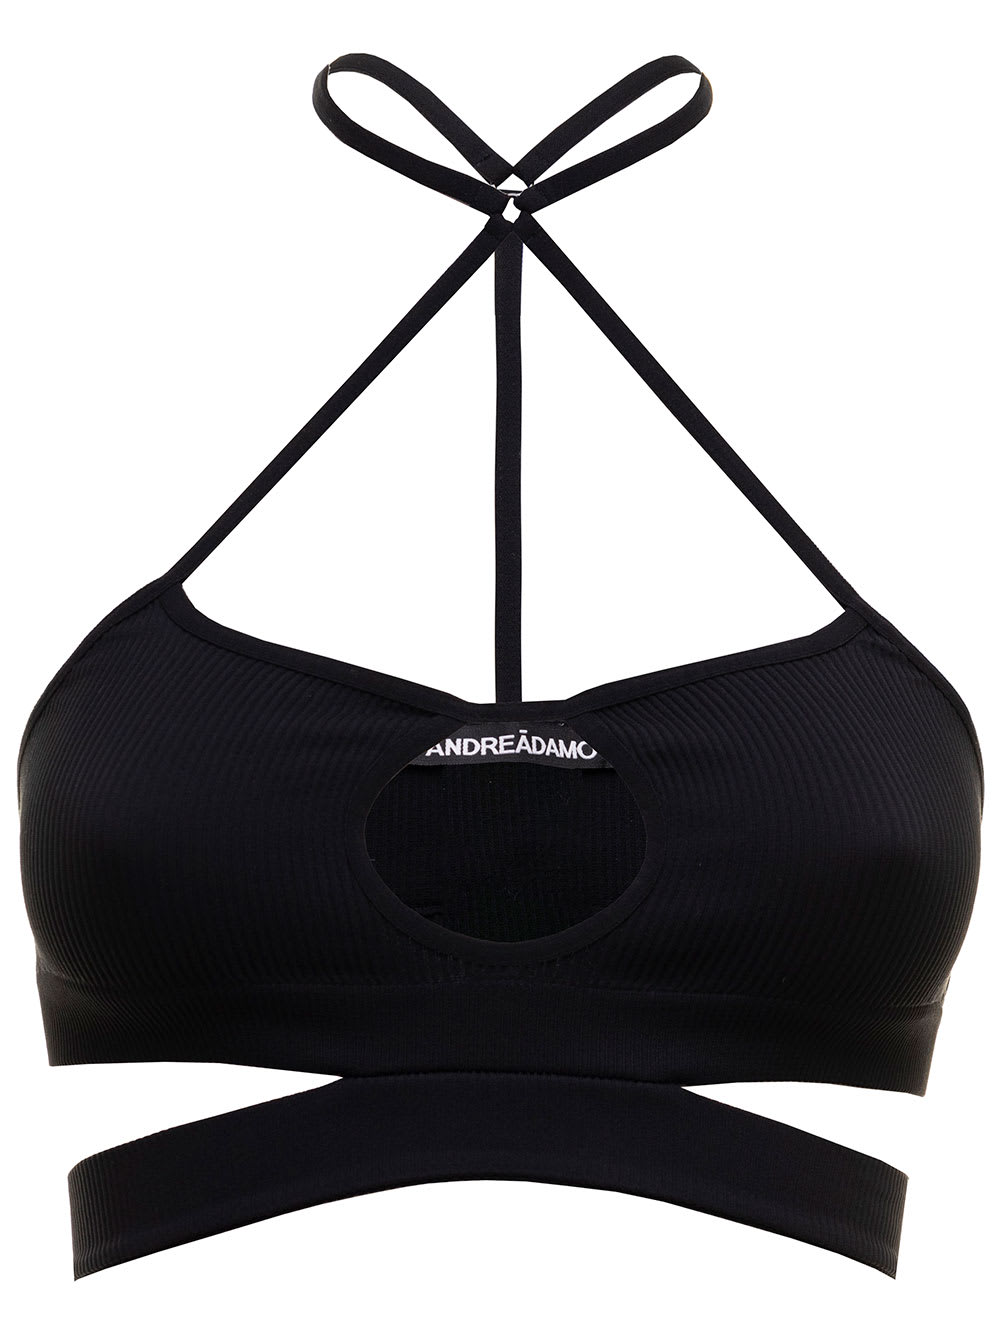 ANDREADAMO Black Top Bralette In Ribbed Knit With Cut-out Detailing Andreadamo Woman